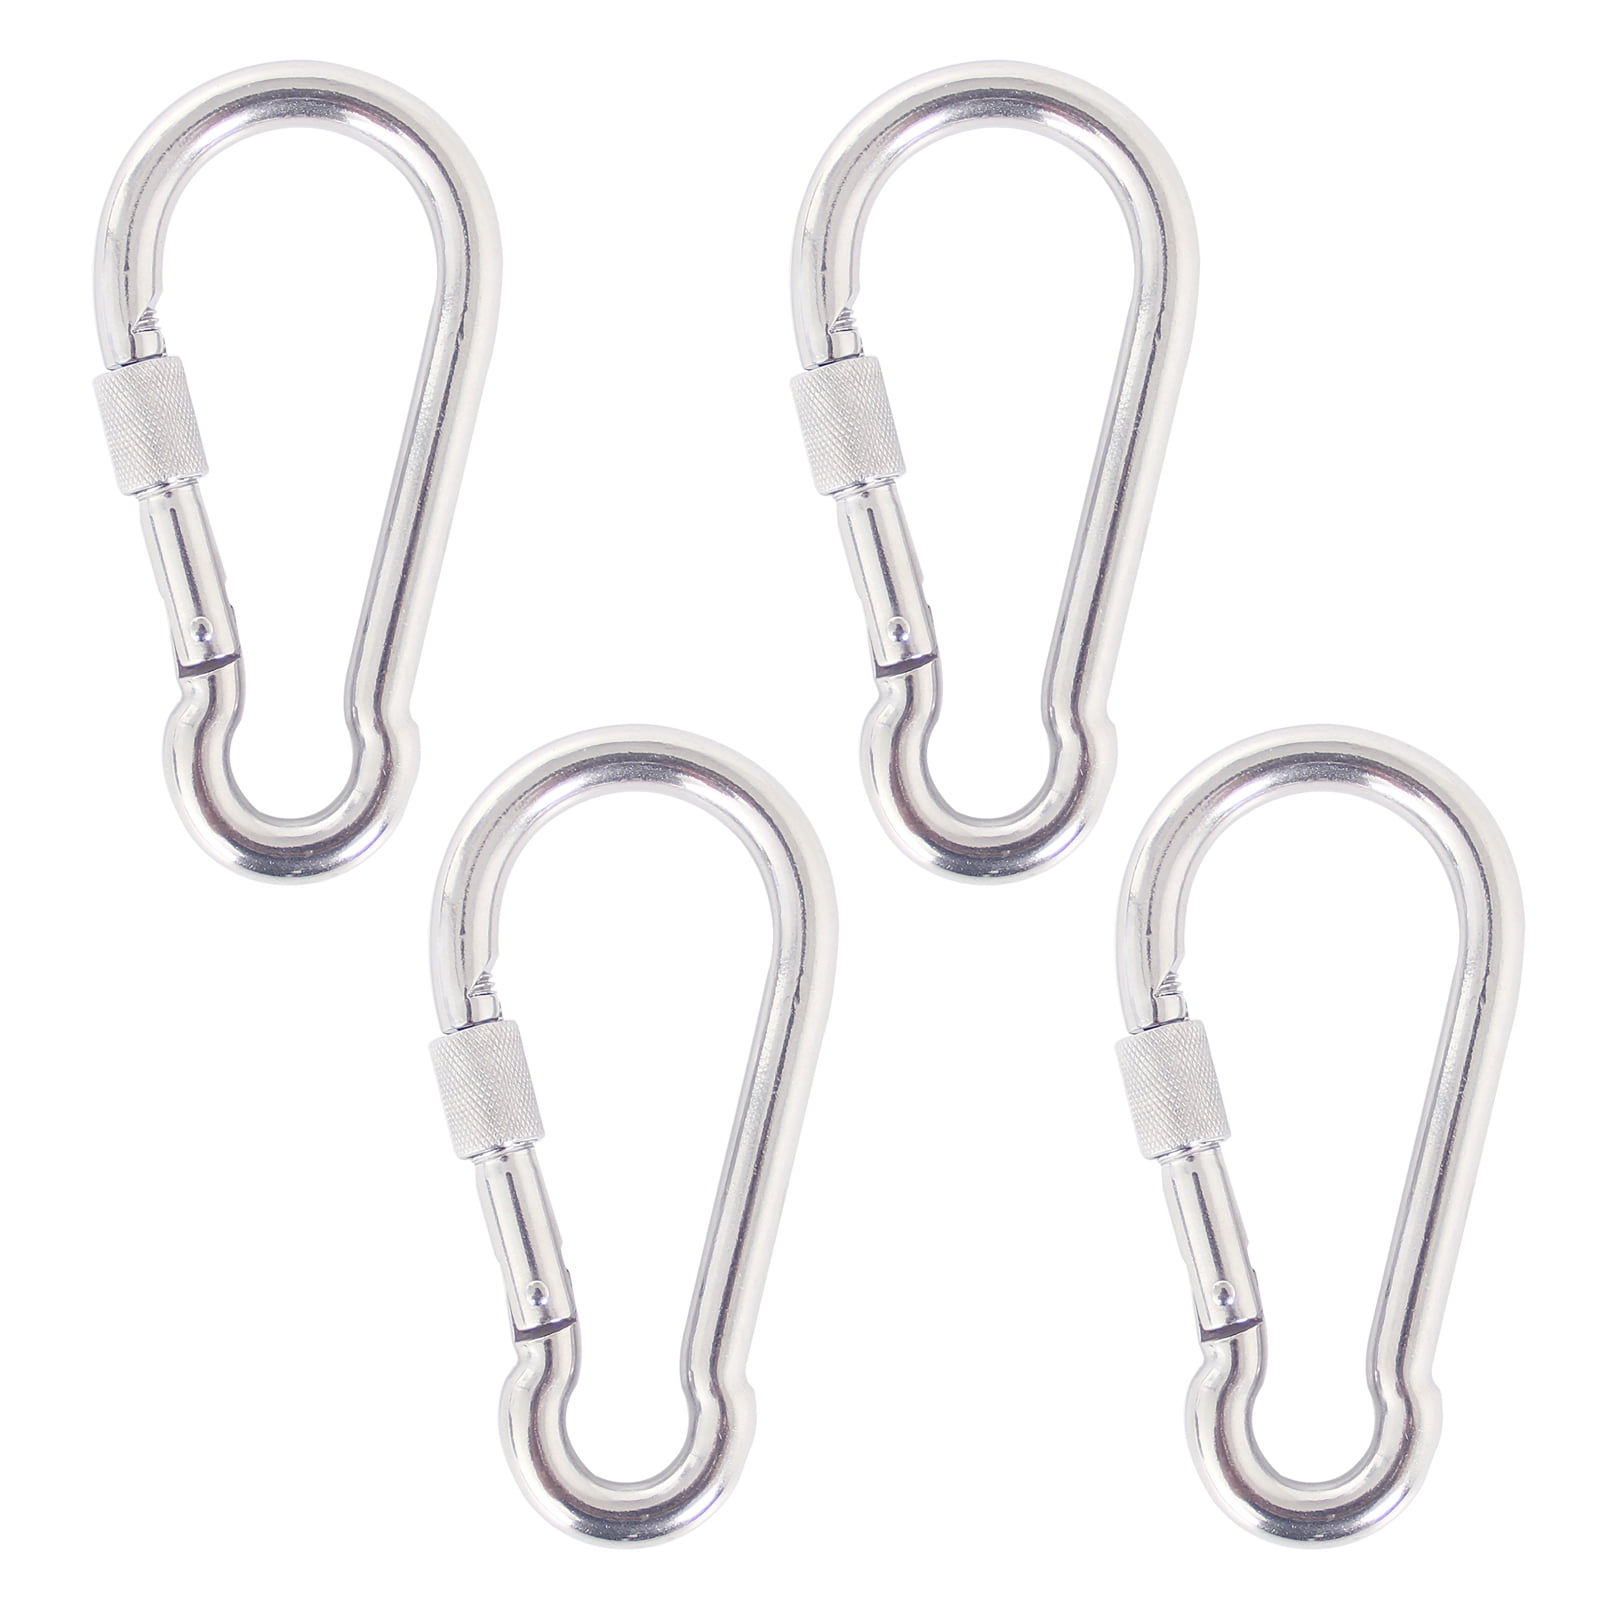 2.4 Inch Stainless Steel Locking Type Carabiner Clip Spring Snap Hook - 4  Packs Heavy Duty Carabiner Clips for Keys, Swing Set, Camping, Fishing,  Hiking Traveling, 250 lbs Capacity 